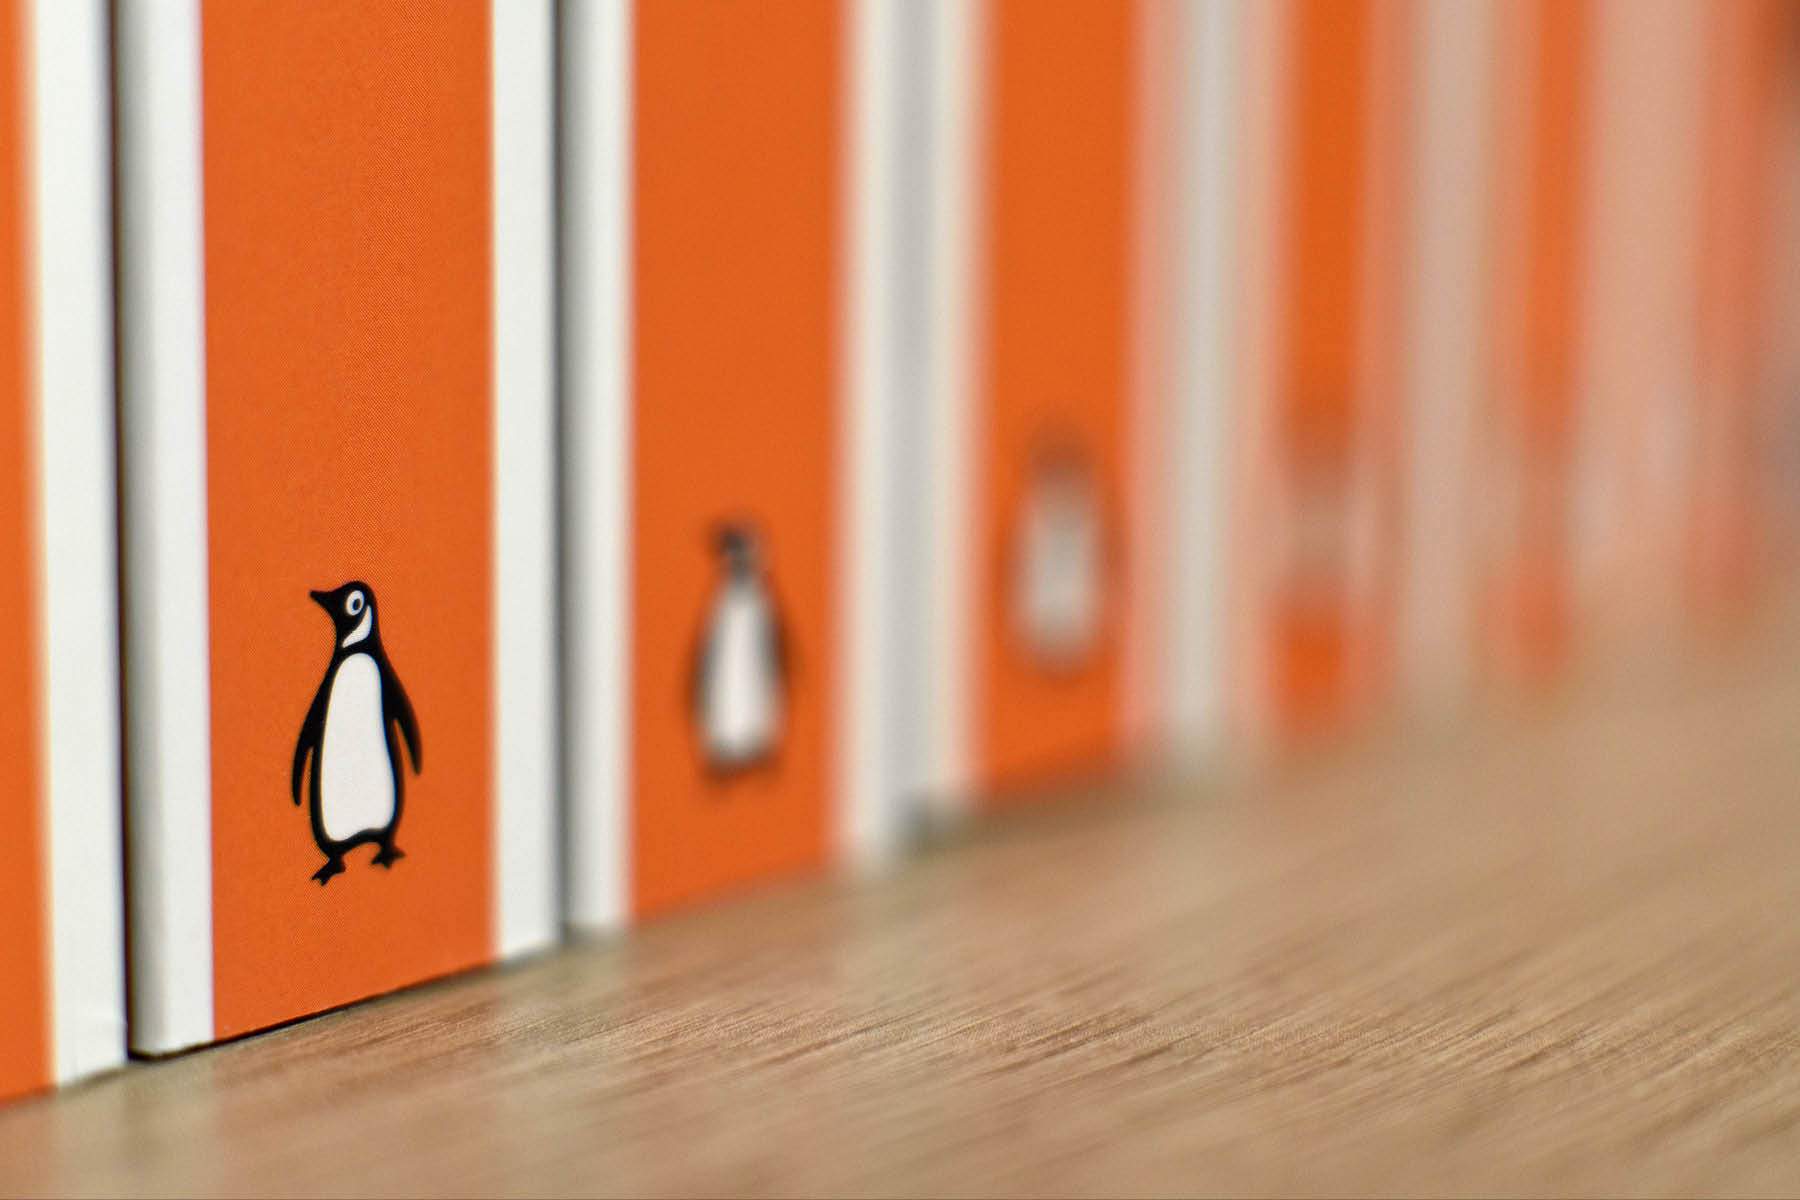 An image of orange Penguin book spines in a row